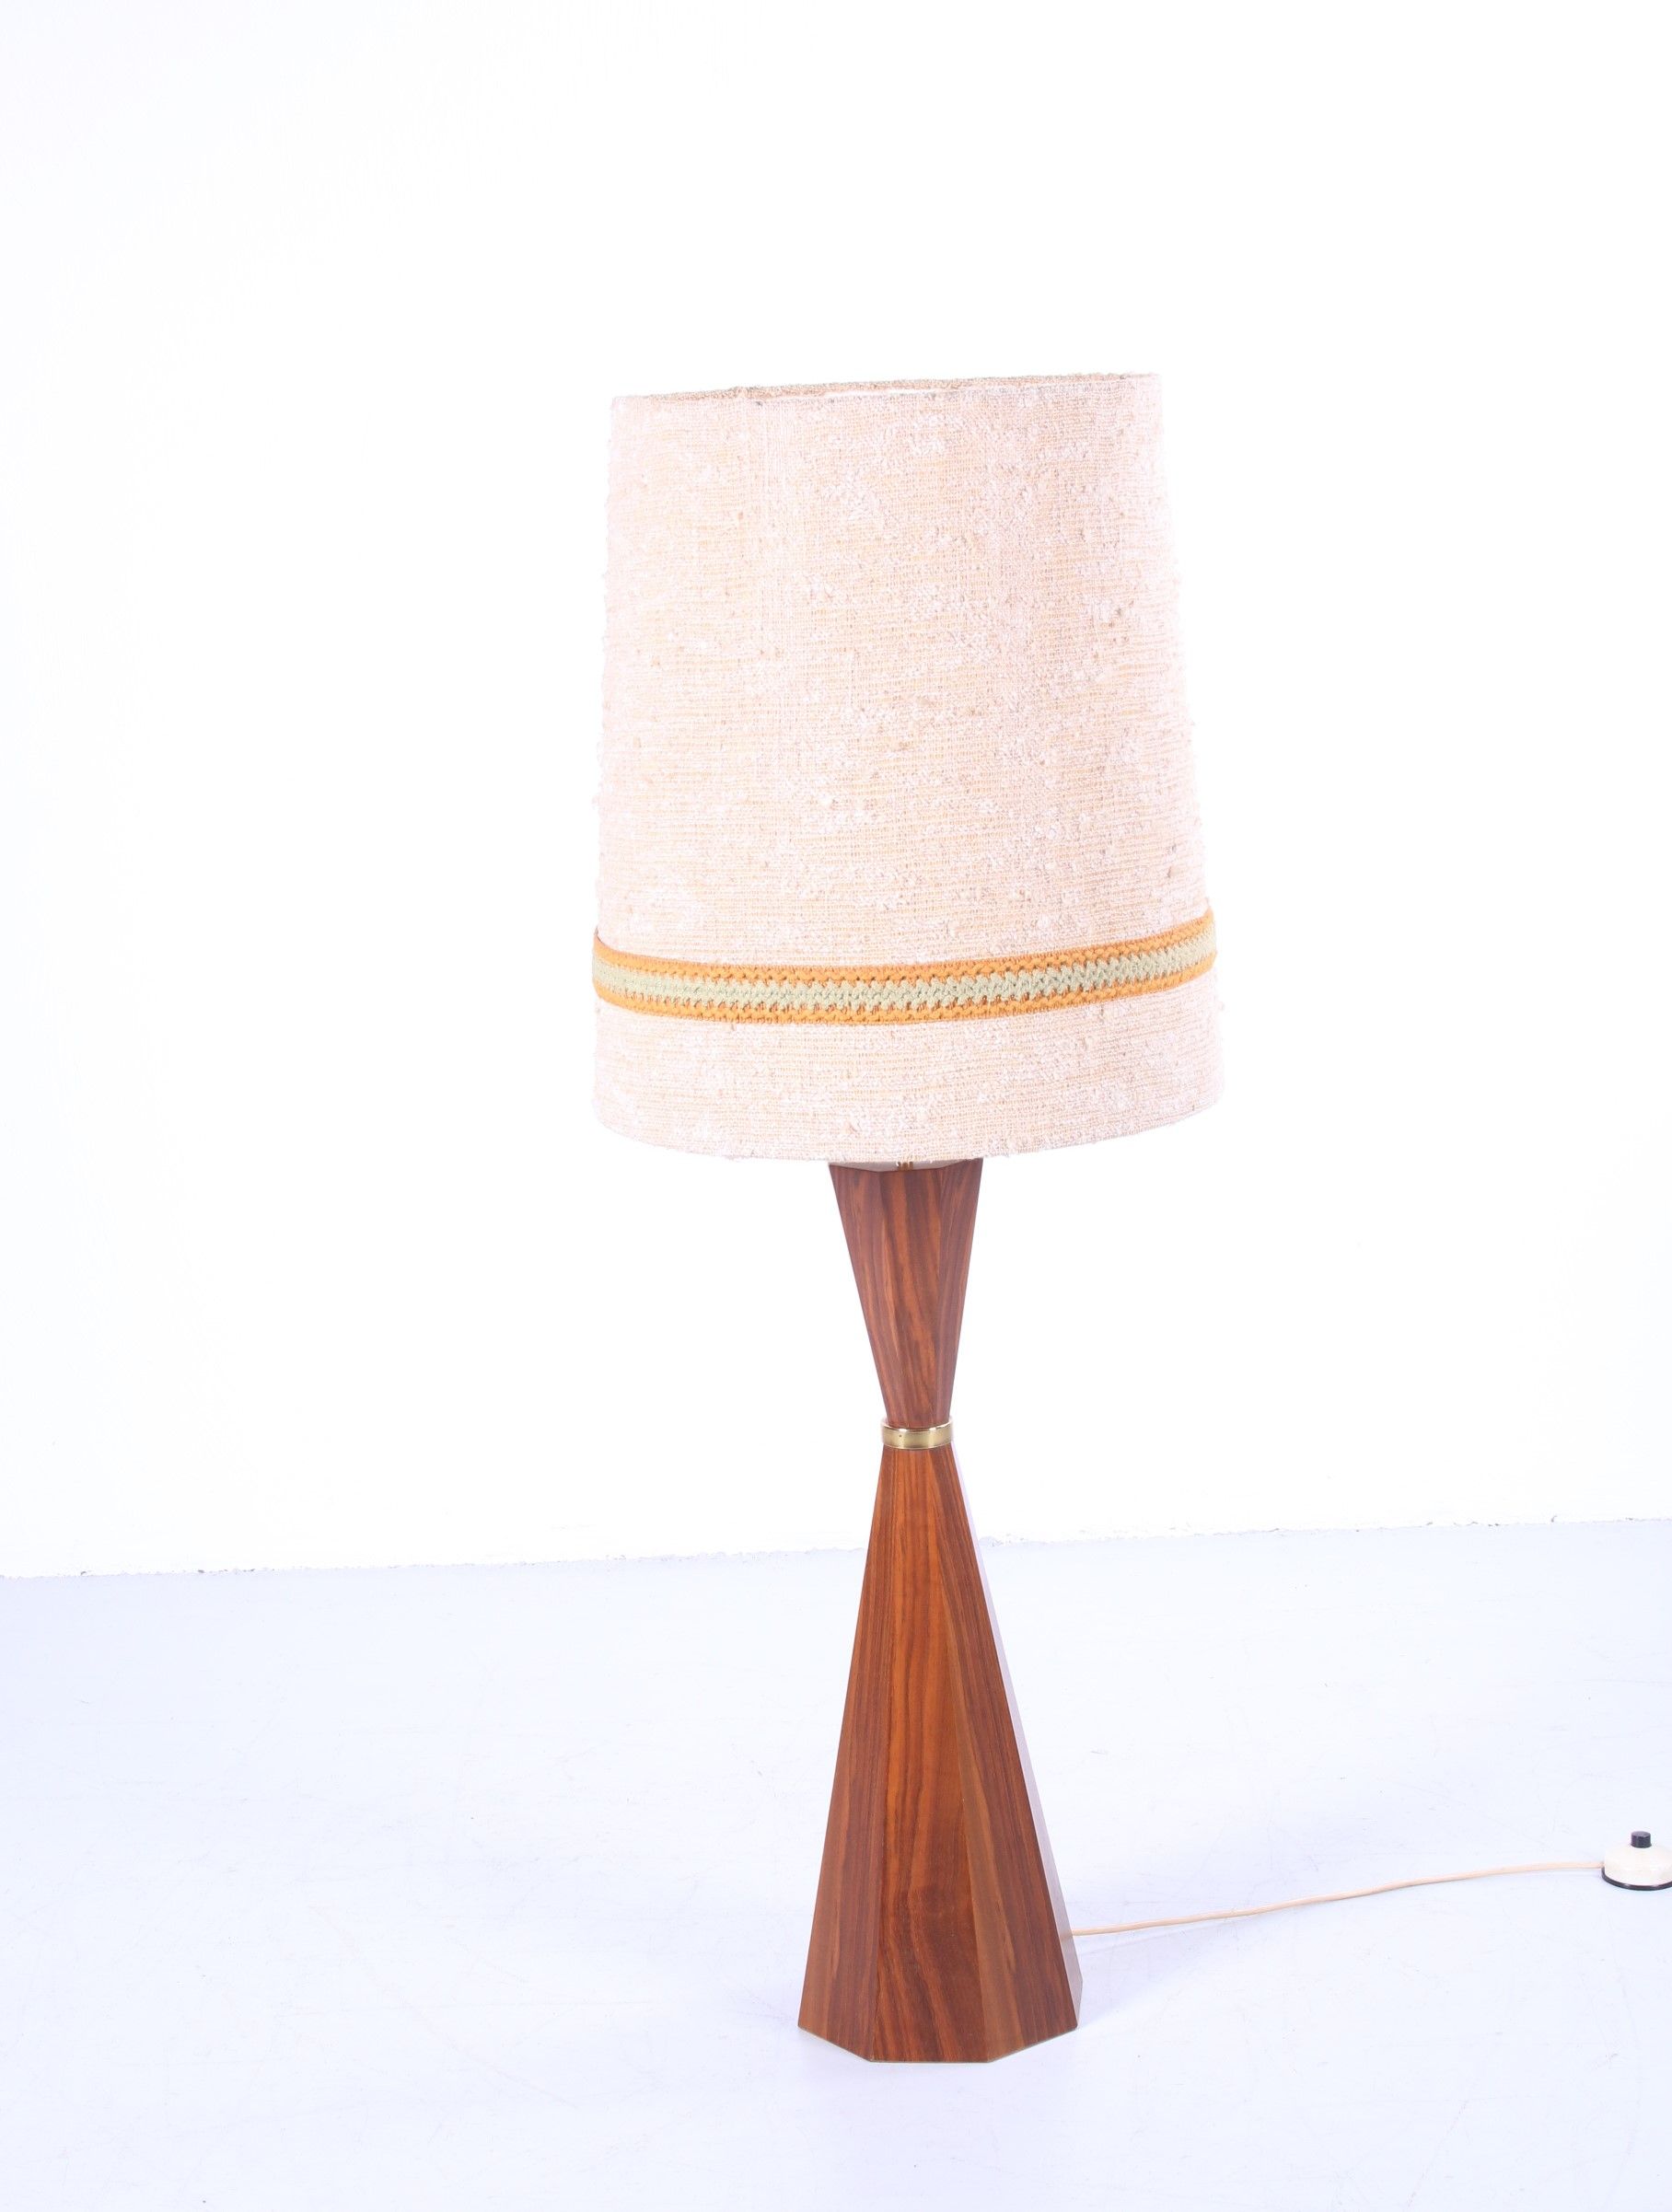 Vintage Floor Lamp With Wooden Base And, Old Wooden Floor Lamps